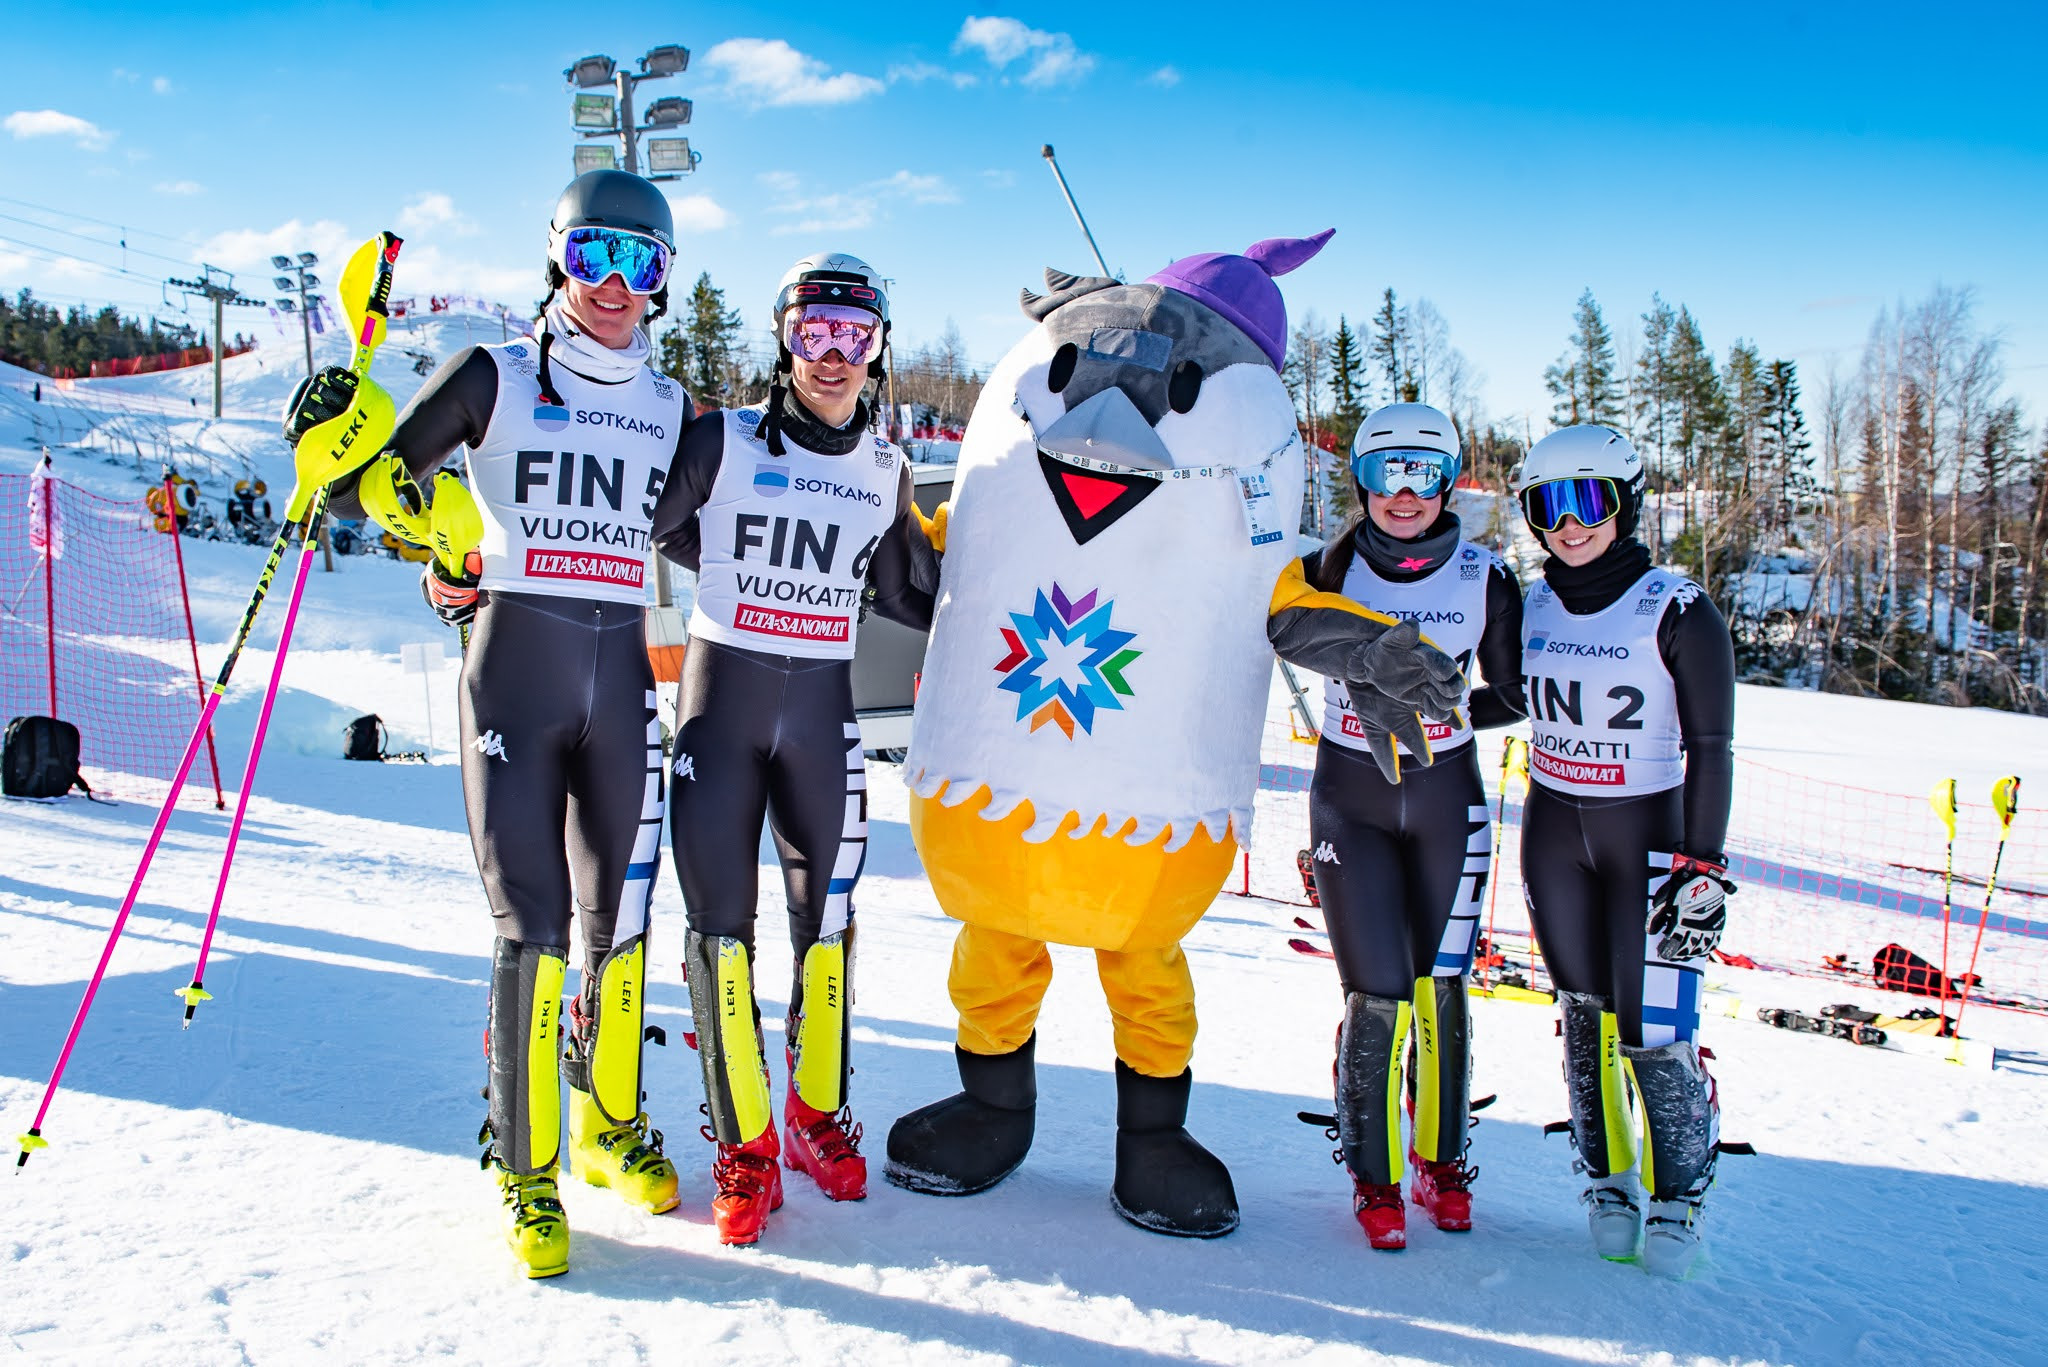 After winning the boys' and girls' slalom events, hosts Finland had to settle for bronze in the mixed team parallel ©Hannu Kilpeläinen/EYOF 2022 Vuokatti